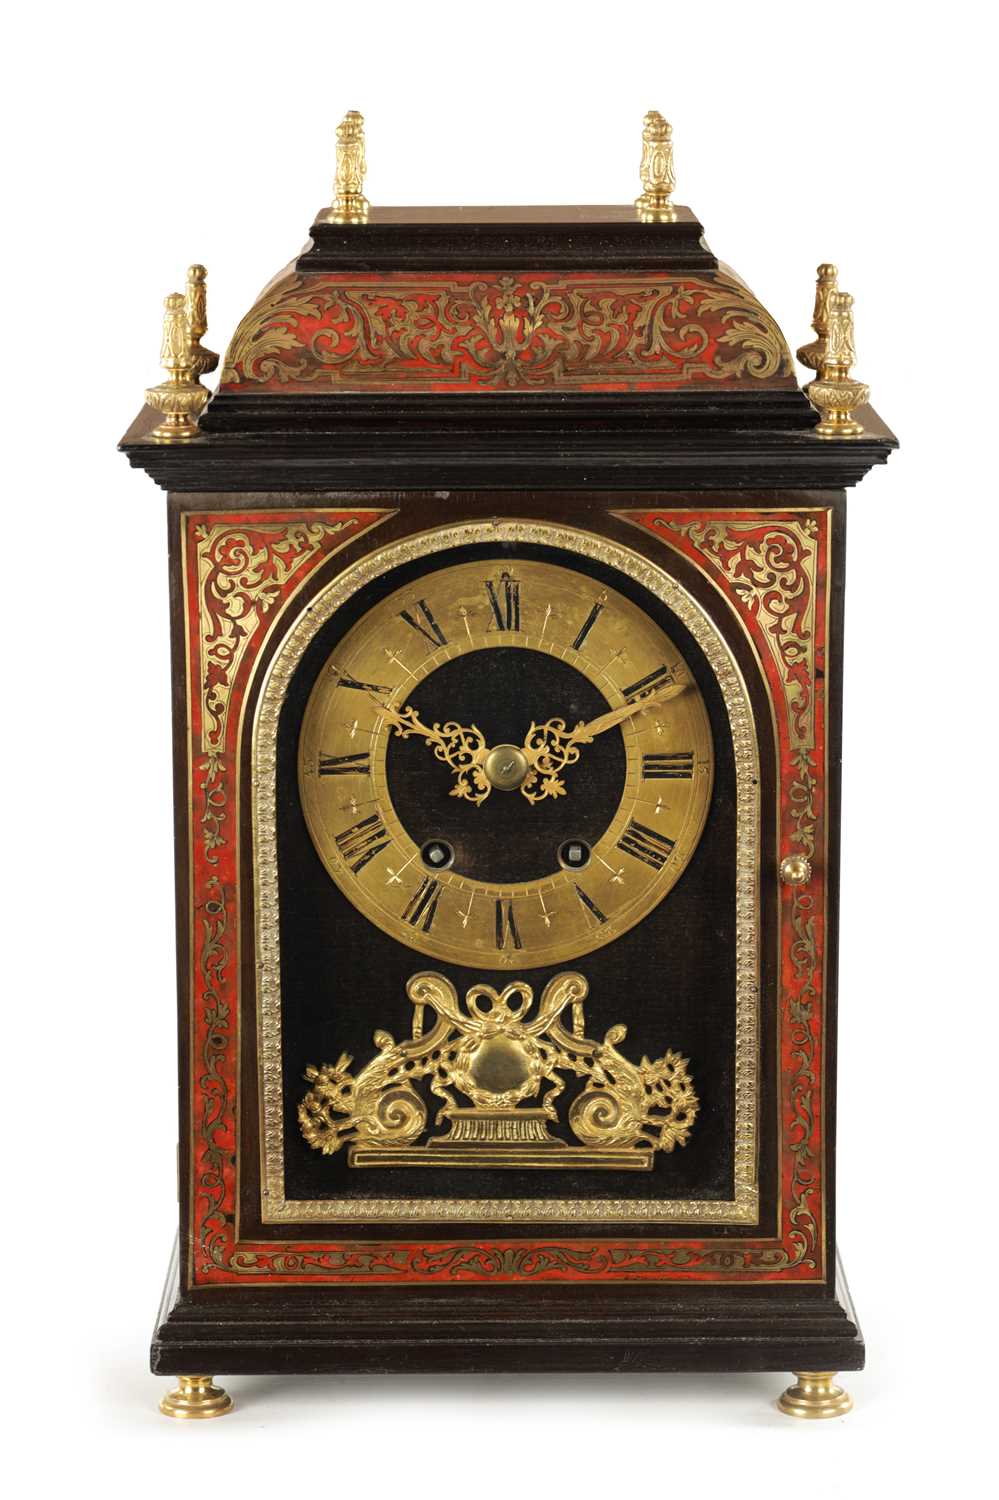 Lot 1265 - A LATE 19TH CENTURY FRENCH BOULLE MANTEL CLOCK